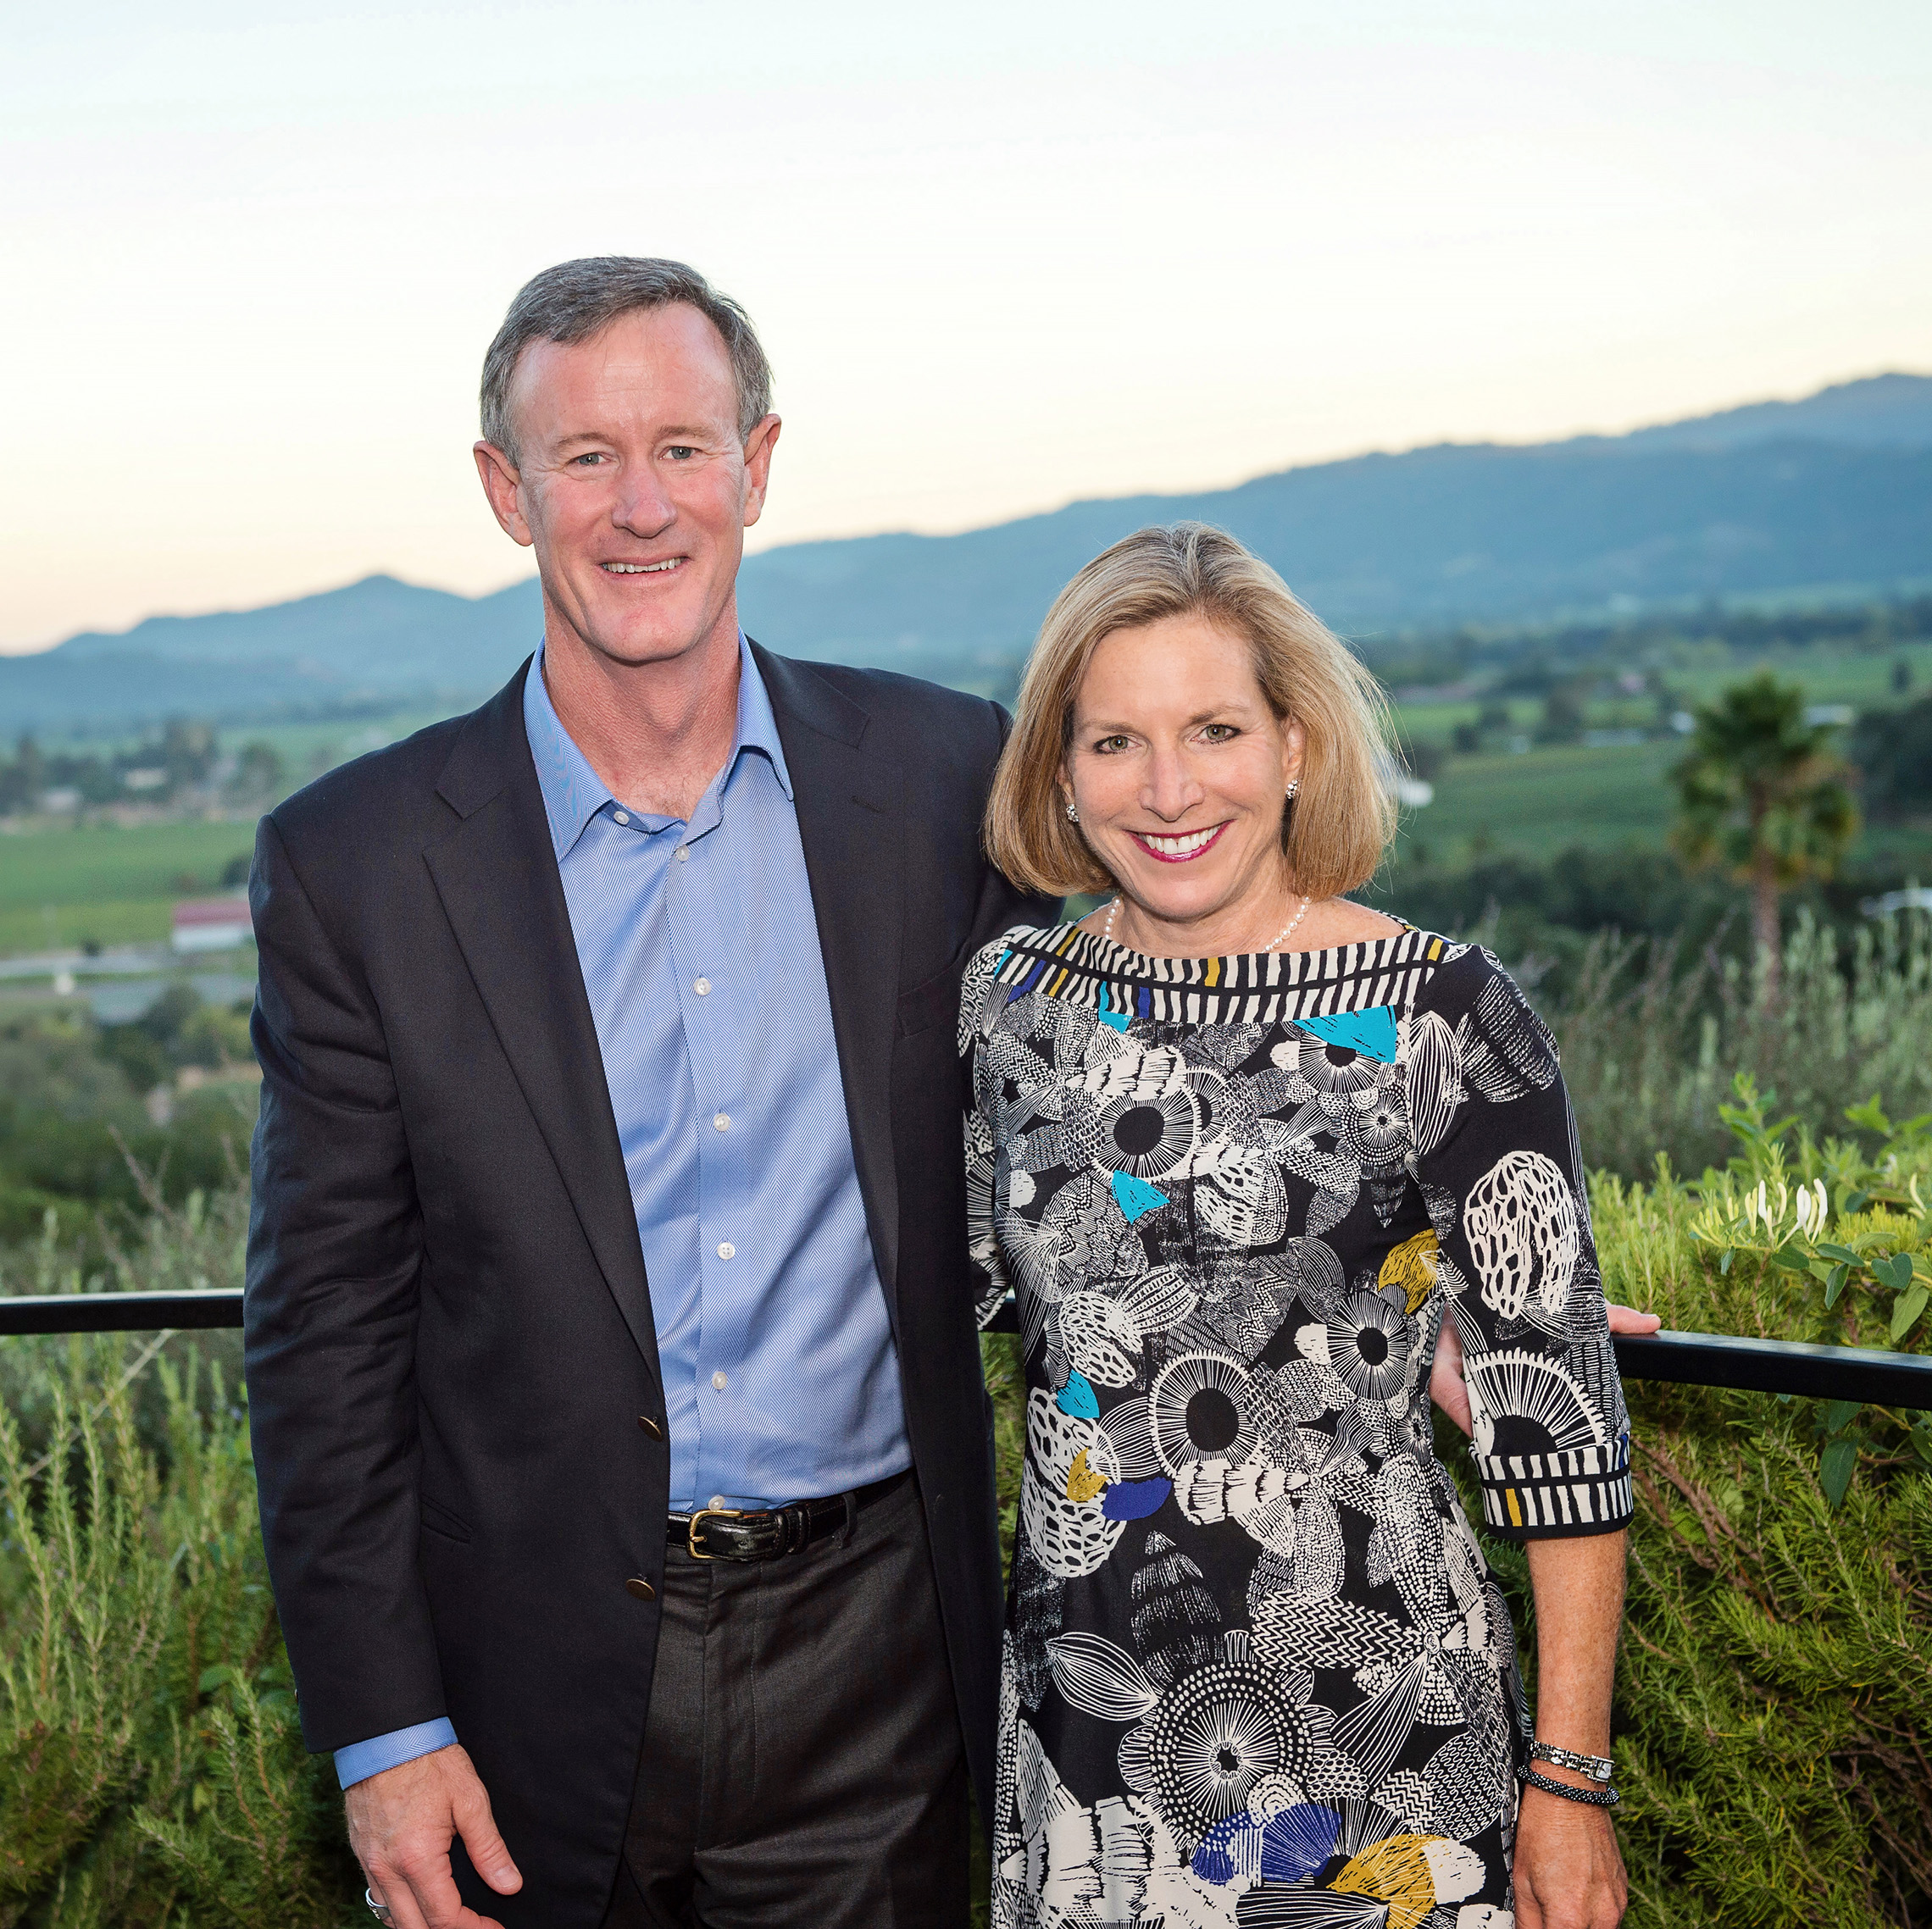 William and Georgeann McRaven enjoy a visit to California's Napa Valley with the Academy of Achievement. (© Academy of Achievement)